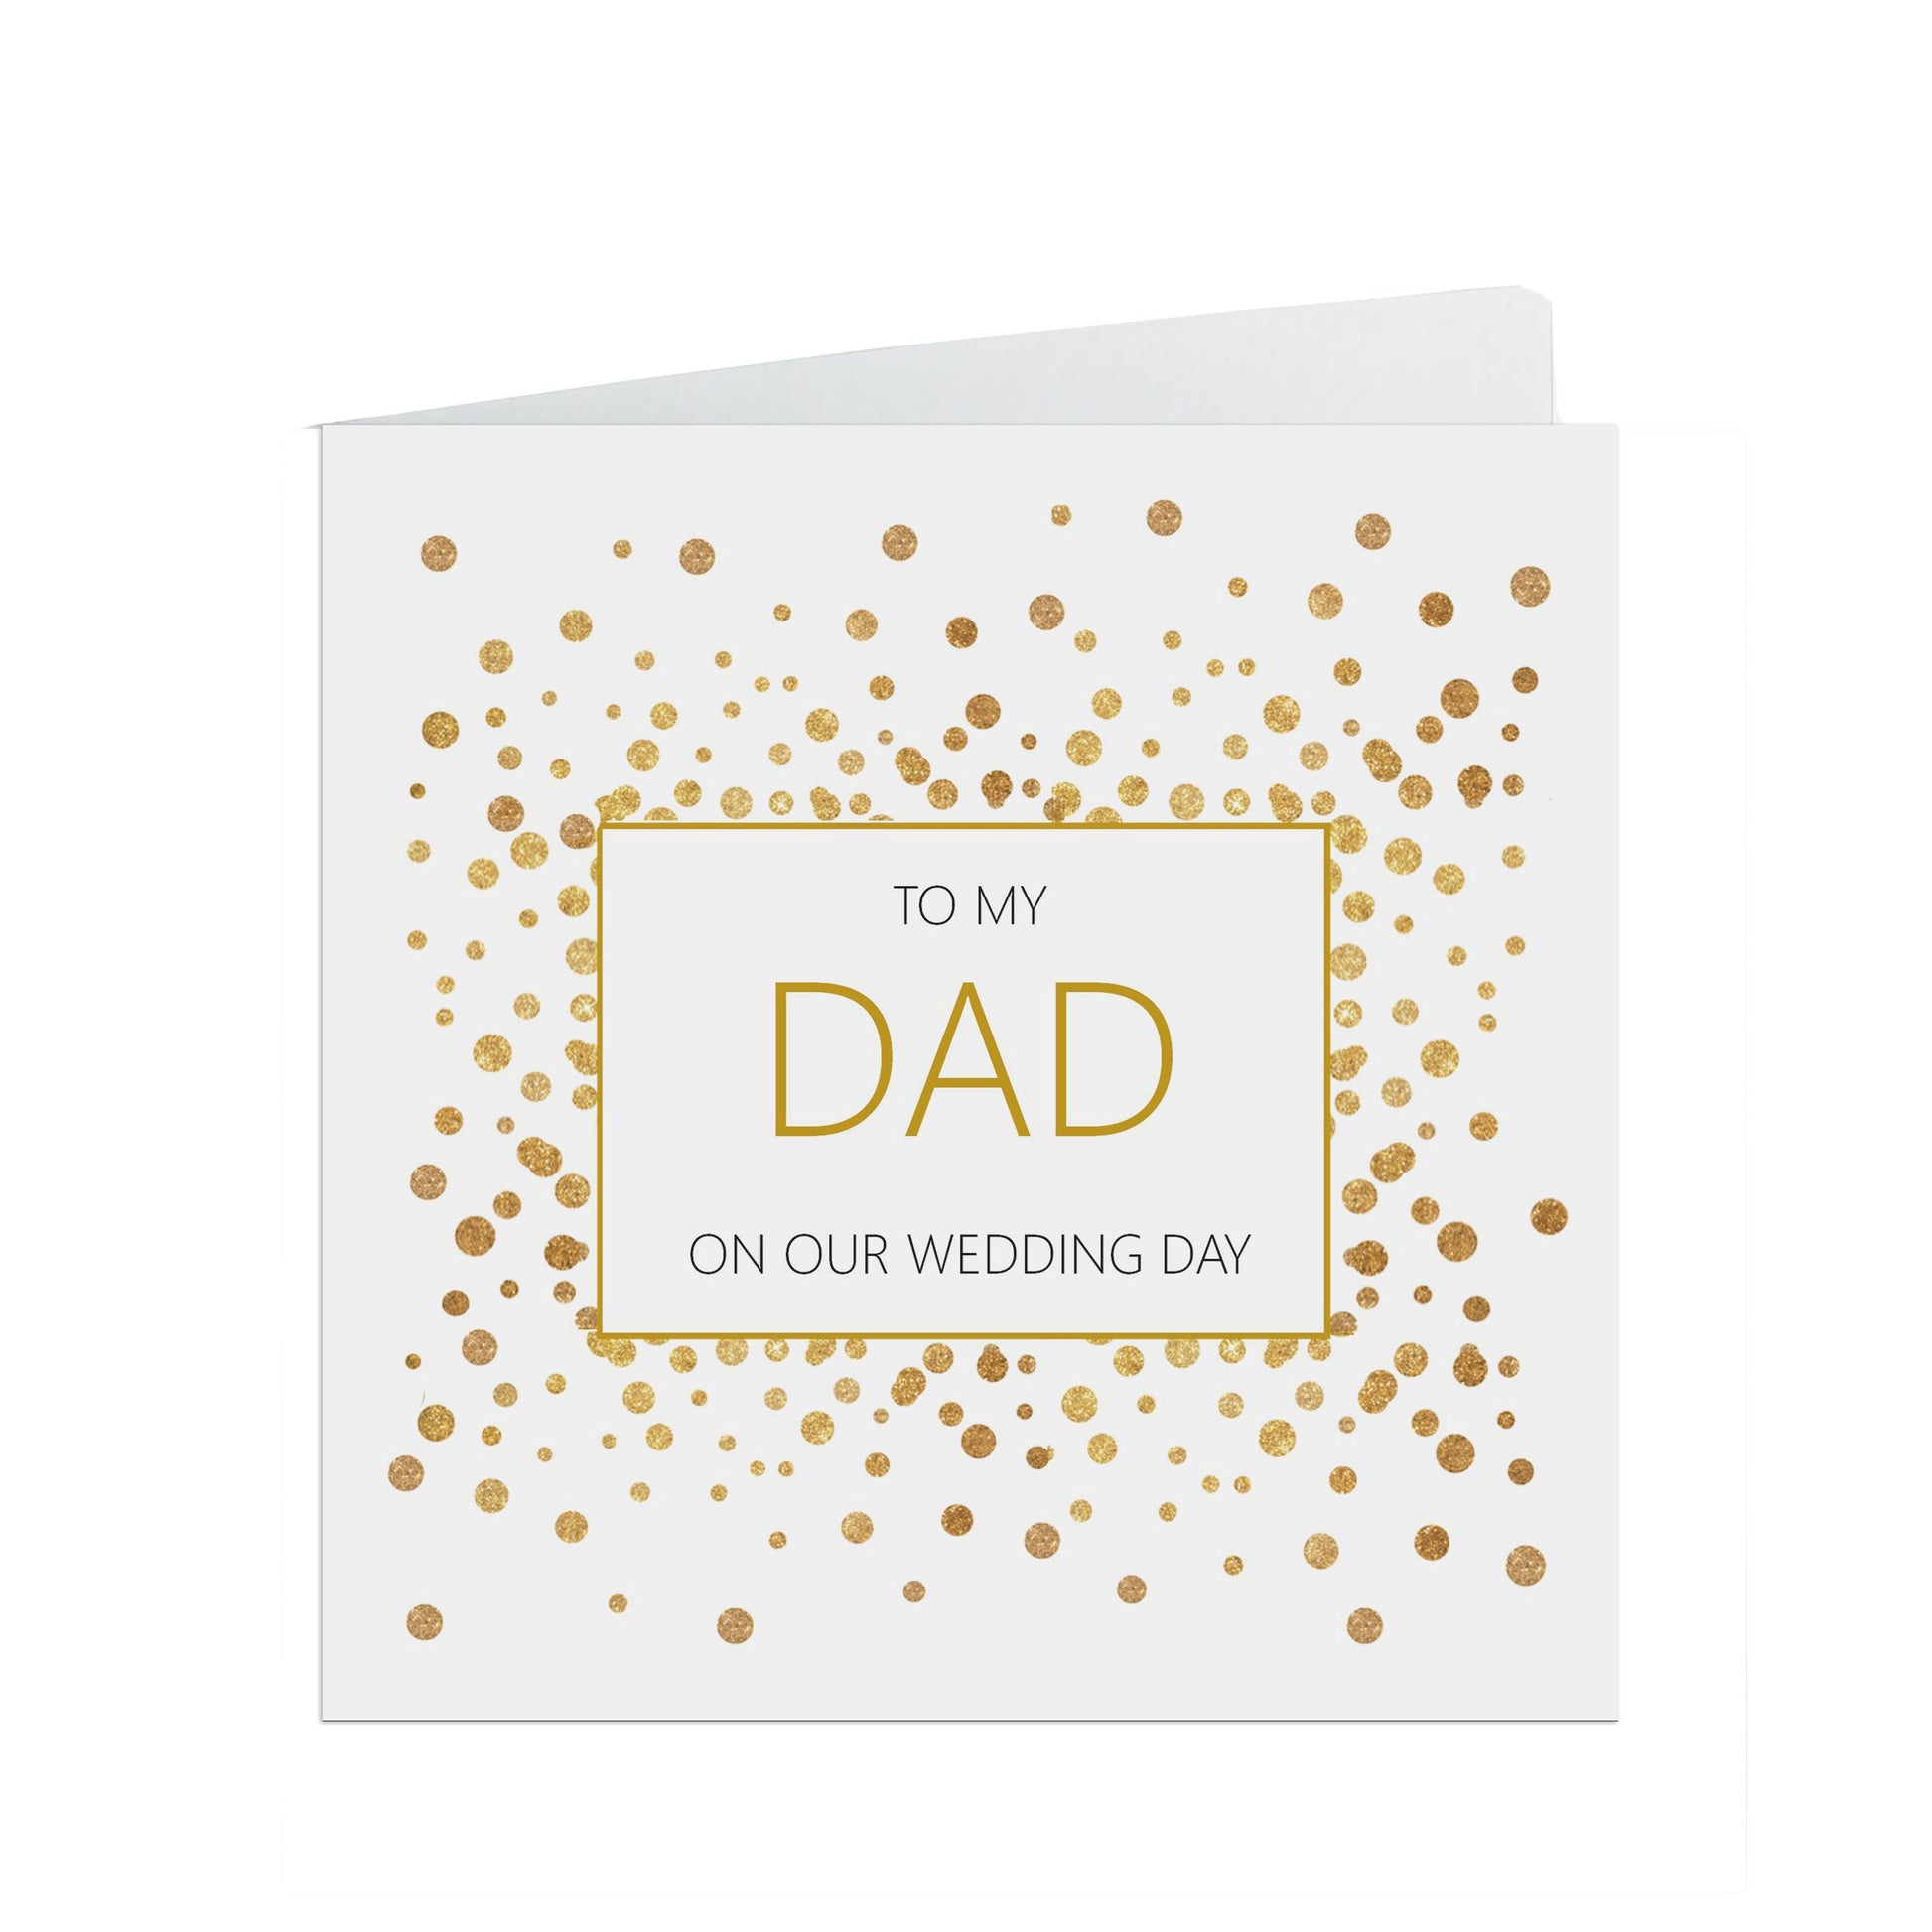 Dad On Our Wedding Day Card, Gold Effect Confetti 6x6 Inches With A White Envelope